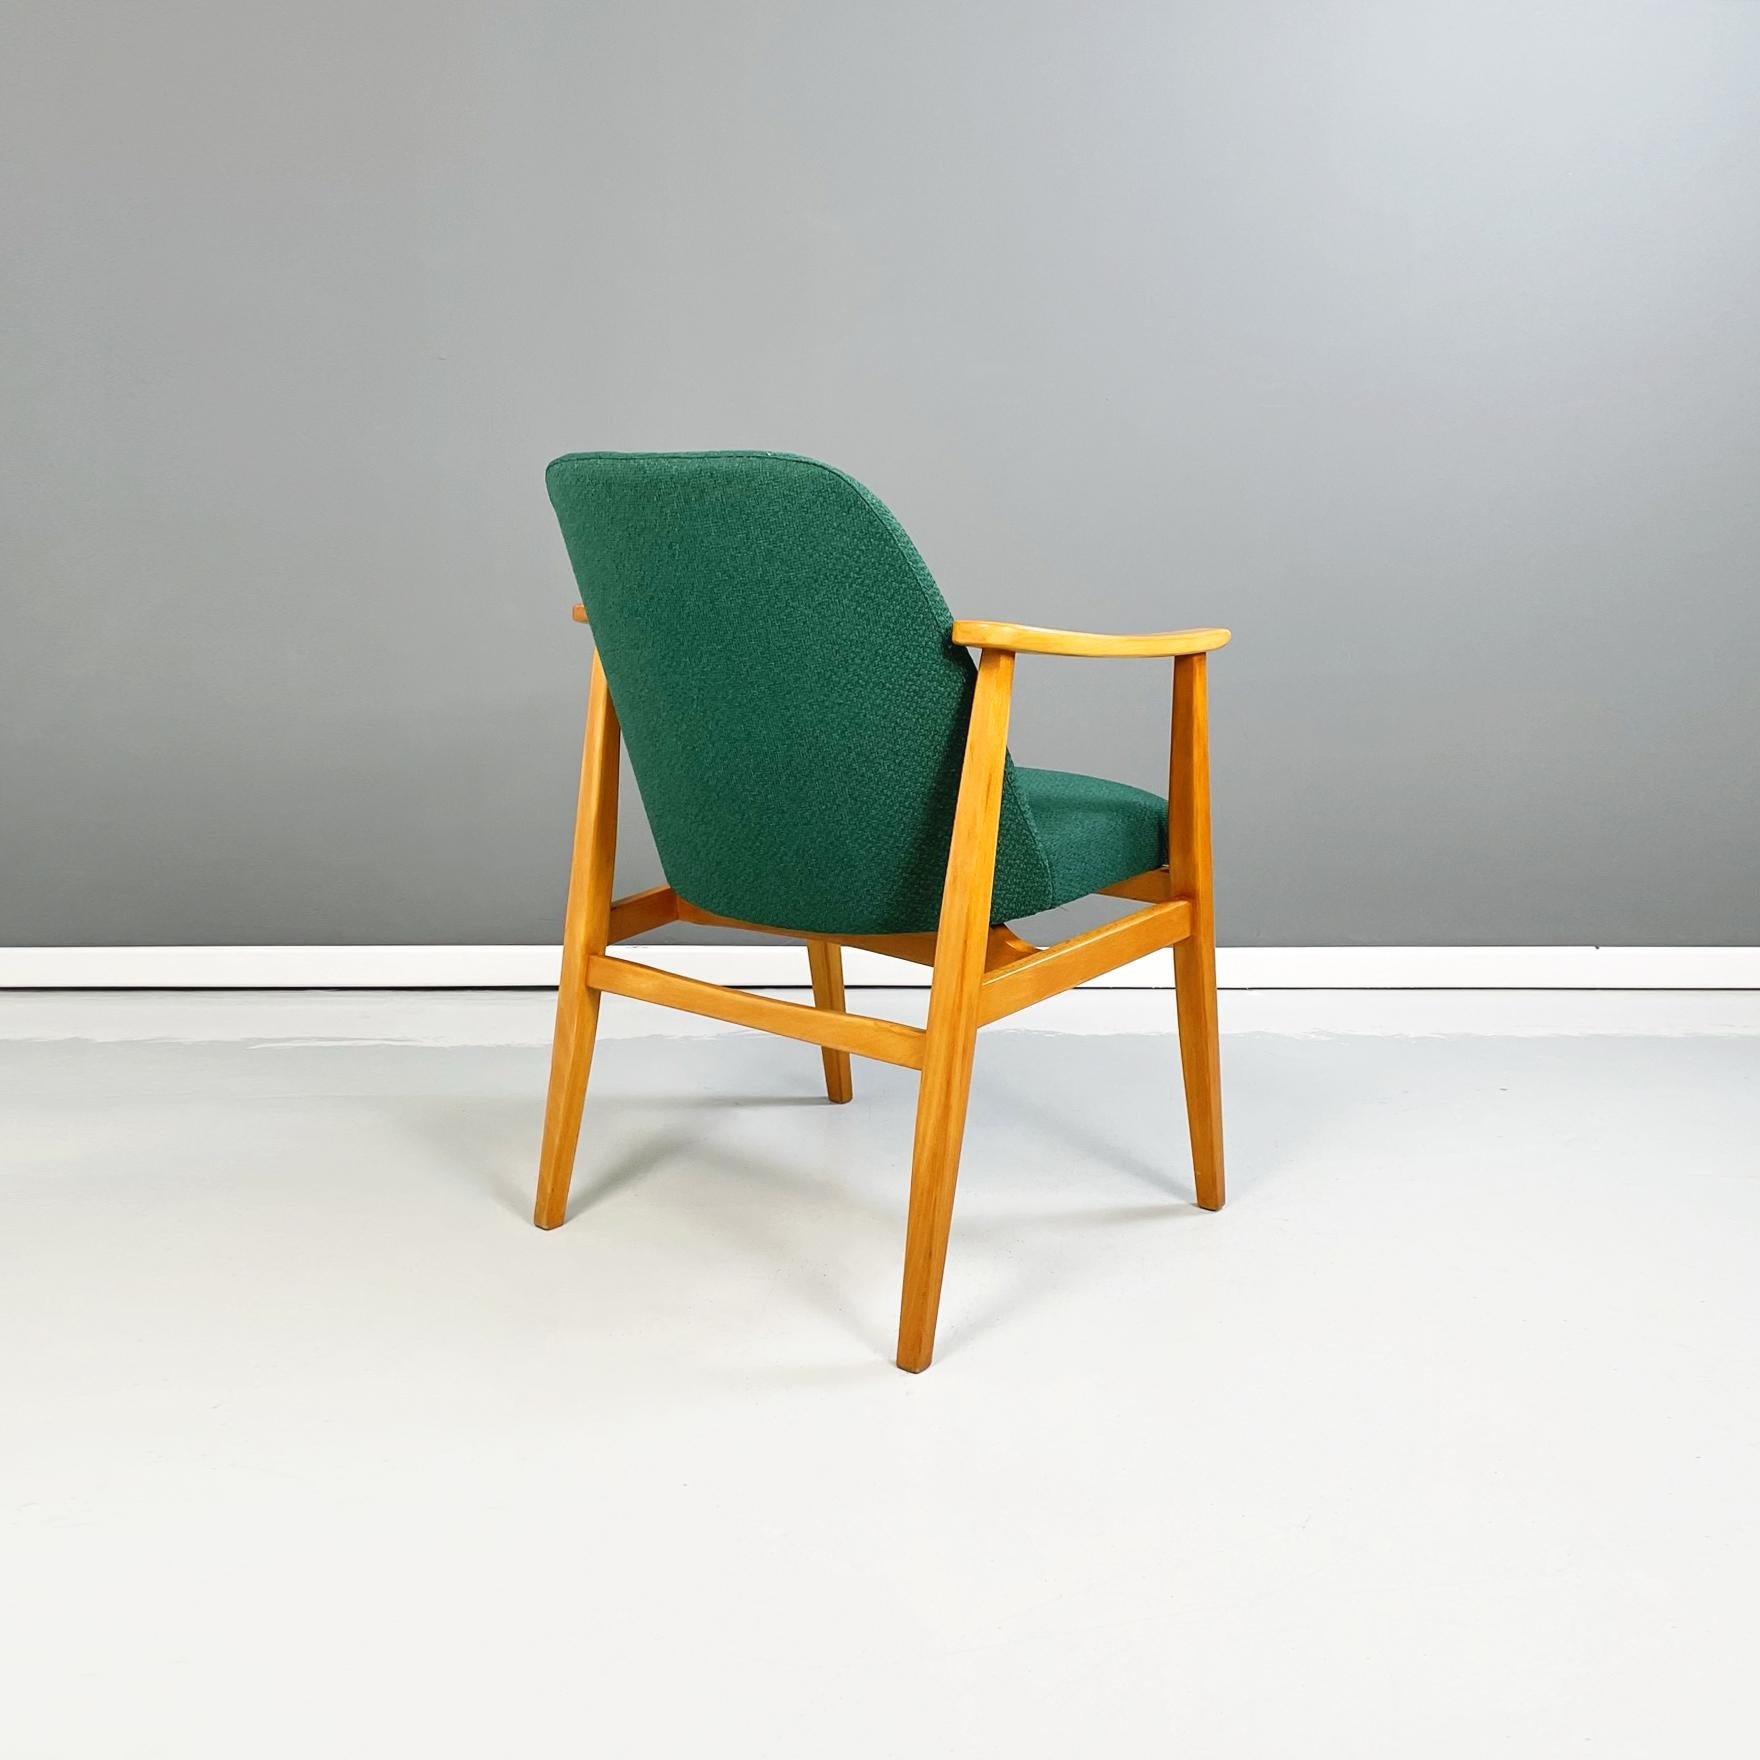 Danish Mid-Century Modern Armchairs in Forest Green Fabric and Wood, 1960s For Sale 2